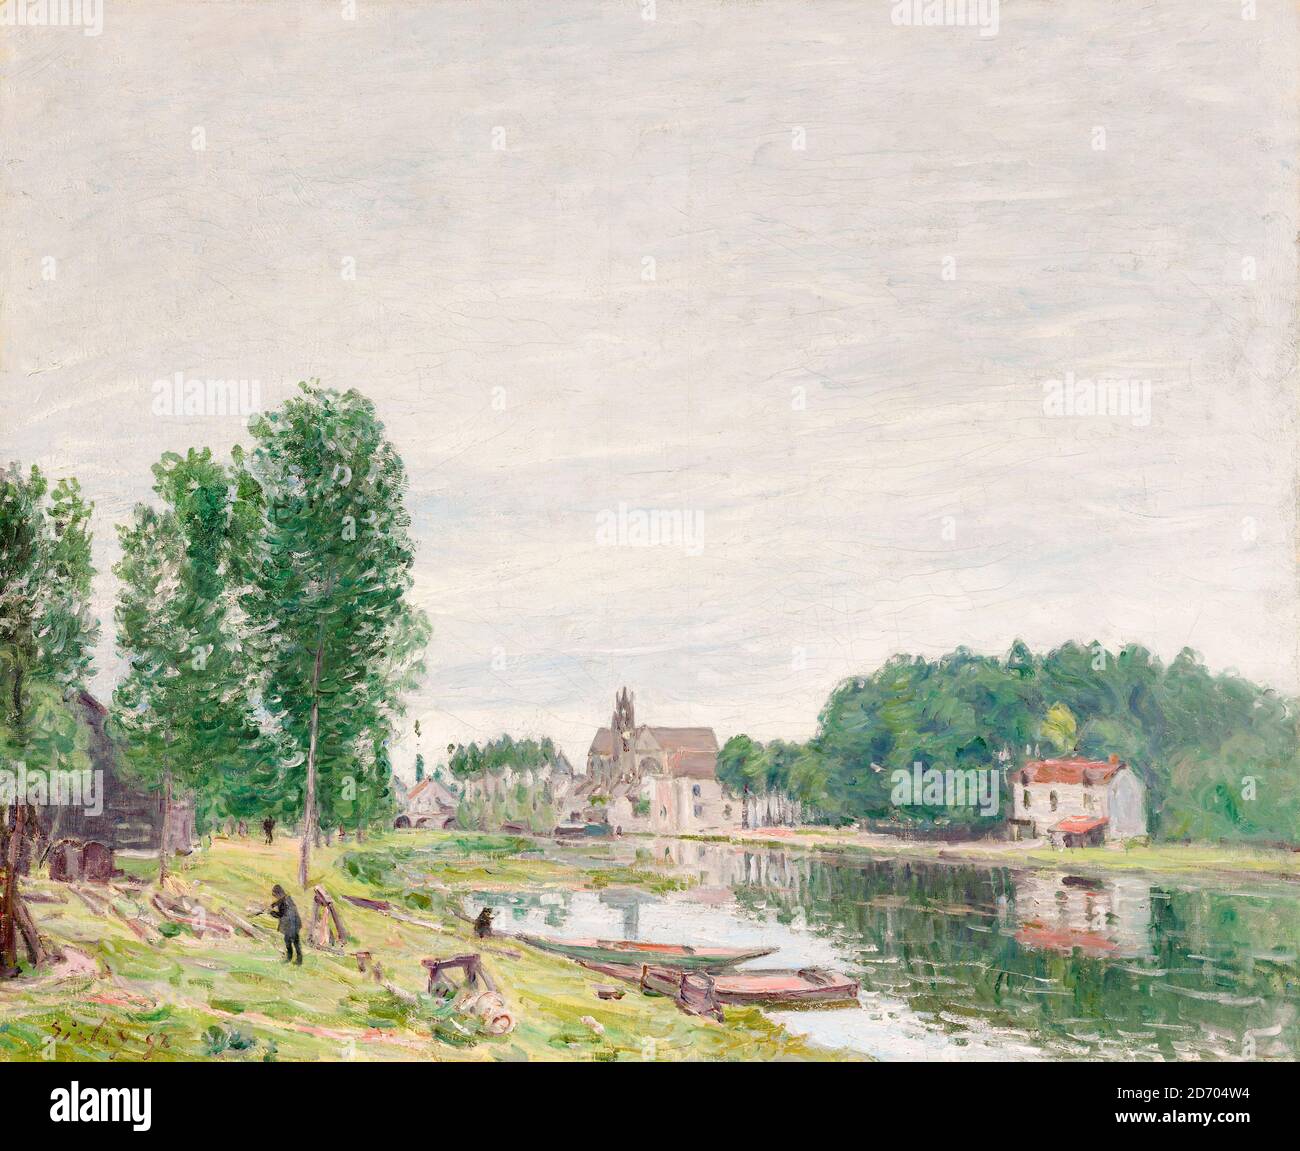 Alfred Sisley, The Matrat Boatyard, Moret-Sur-Loing, Rainy Weather, landscape painting, 1892 Stock Photo